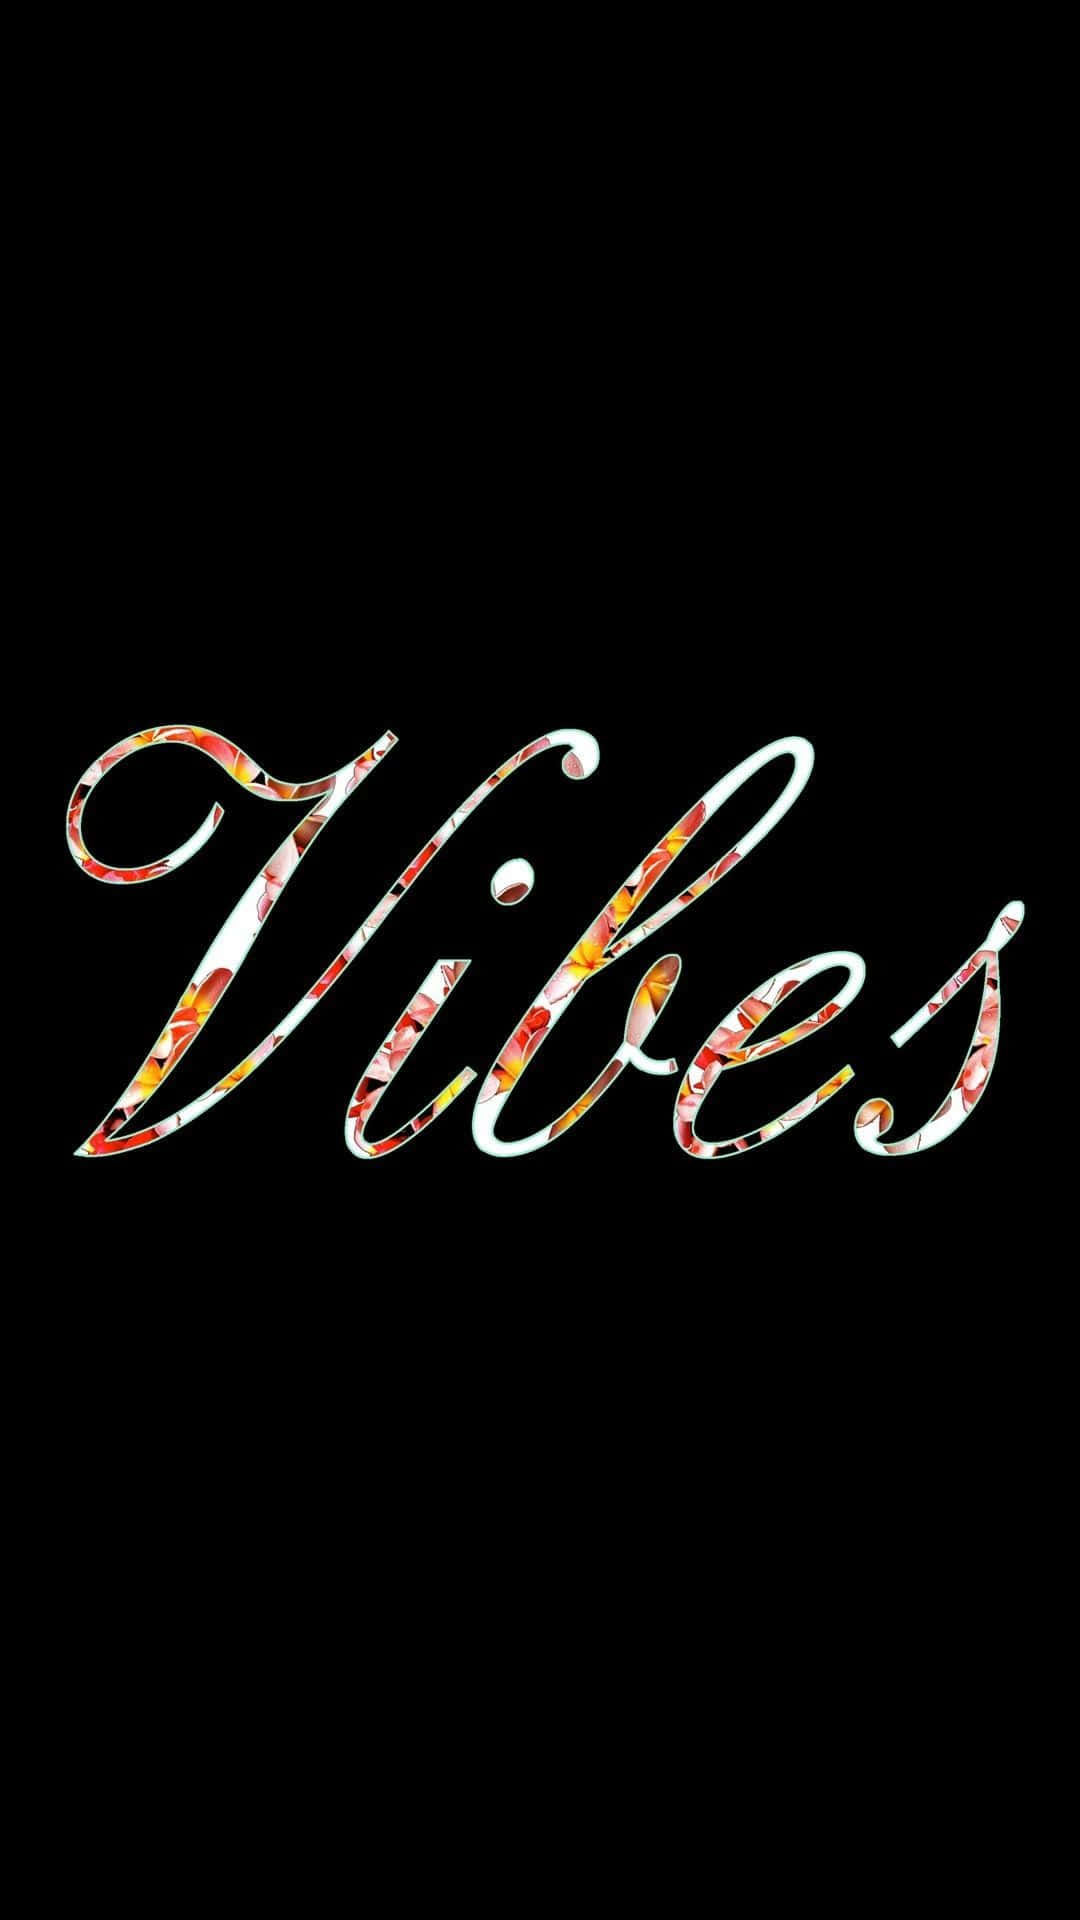 Download Vibes - A Black Background With The Word Vibes Written On It